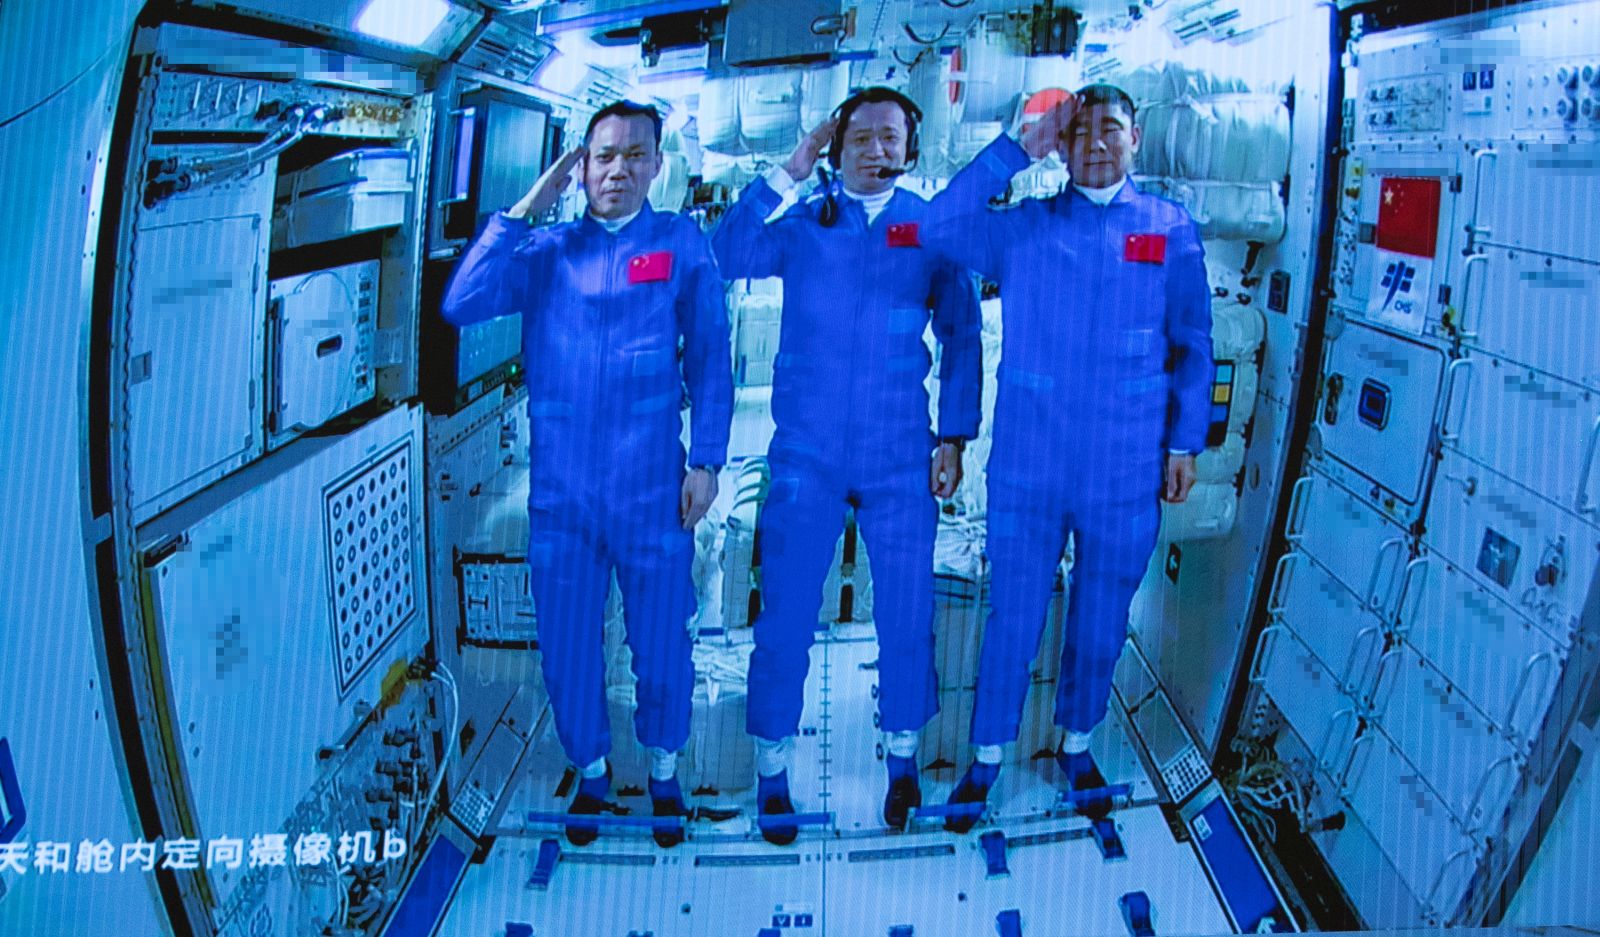 epa09281811 A screen image made available by Xinhua News Agency captured at the Beijing Aerospace Control Center shows three Chinese astronauts onboard the Shenzhou-12 spaceship saluting after entering the Tianhe space station core module in Beijing, China, 17 June 2021 (issued 18 June 2021). China launched the Shenzhou-12 spacecraft carrying three crew members Tang Hongbo, Nie Haisheng, and Liu Boming to the orbiting Tianhe core module for a three-month mission on 17 June. The mission is China's first manned spaceflight in almost five years.  EPA/XINHUA/JIN LIWANG MANDATORY CREDIT EDITORIAL USE ONLY/NO SALES